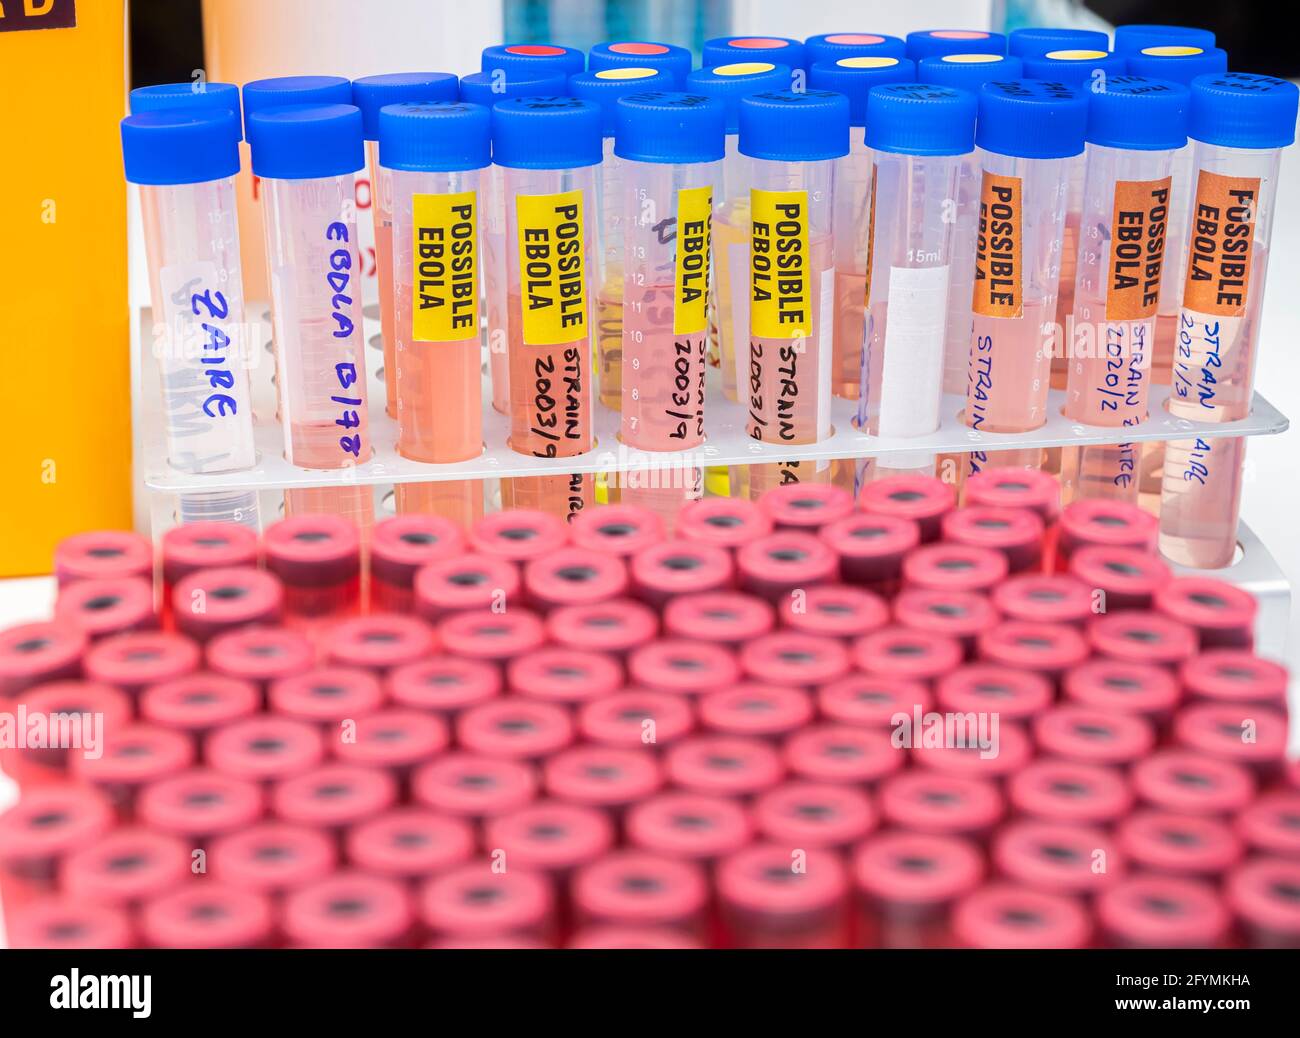 Blood sample from Ebola patient, positive result, conceptual image Stock Photo